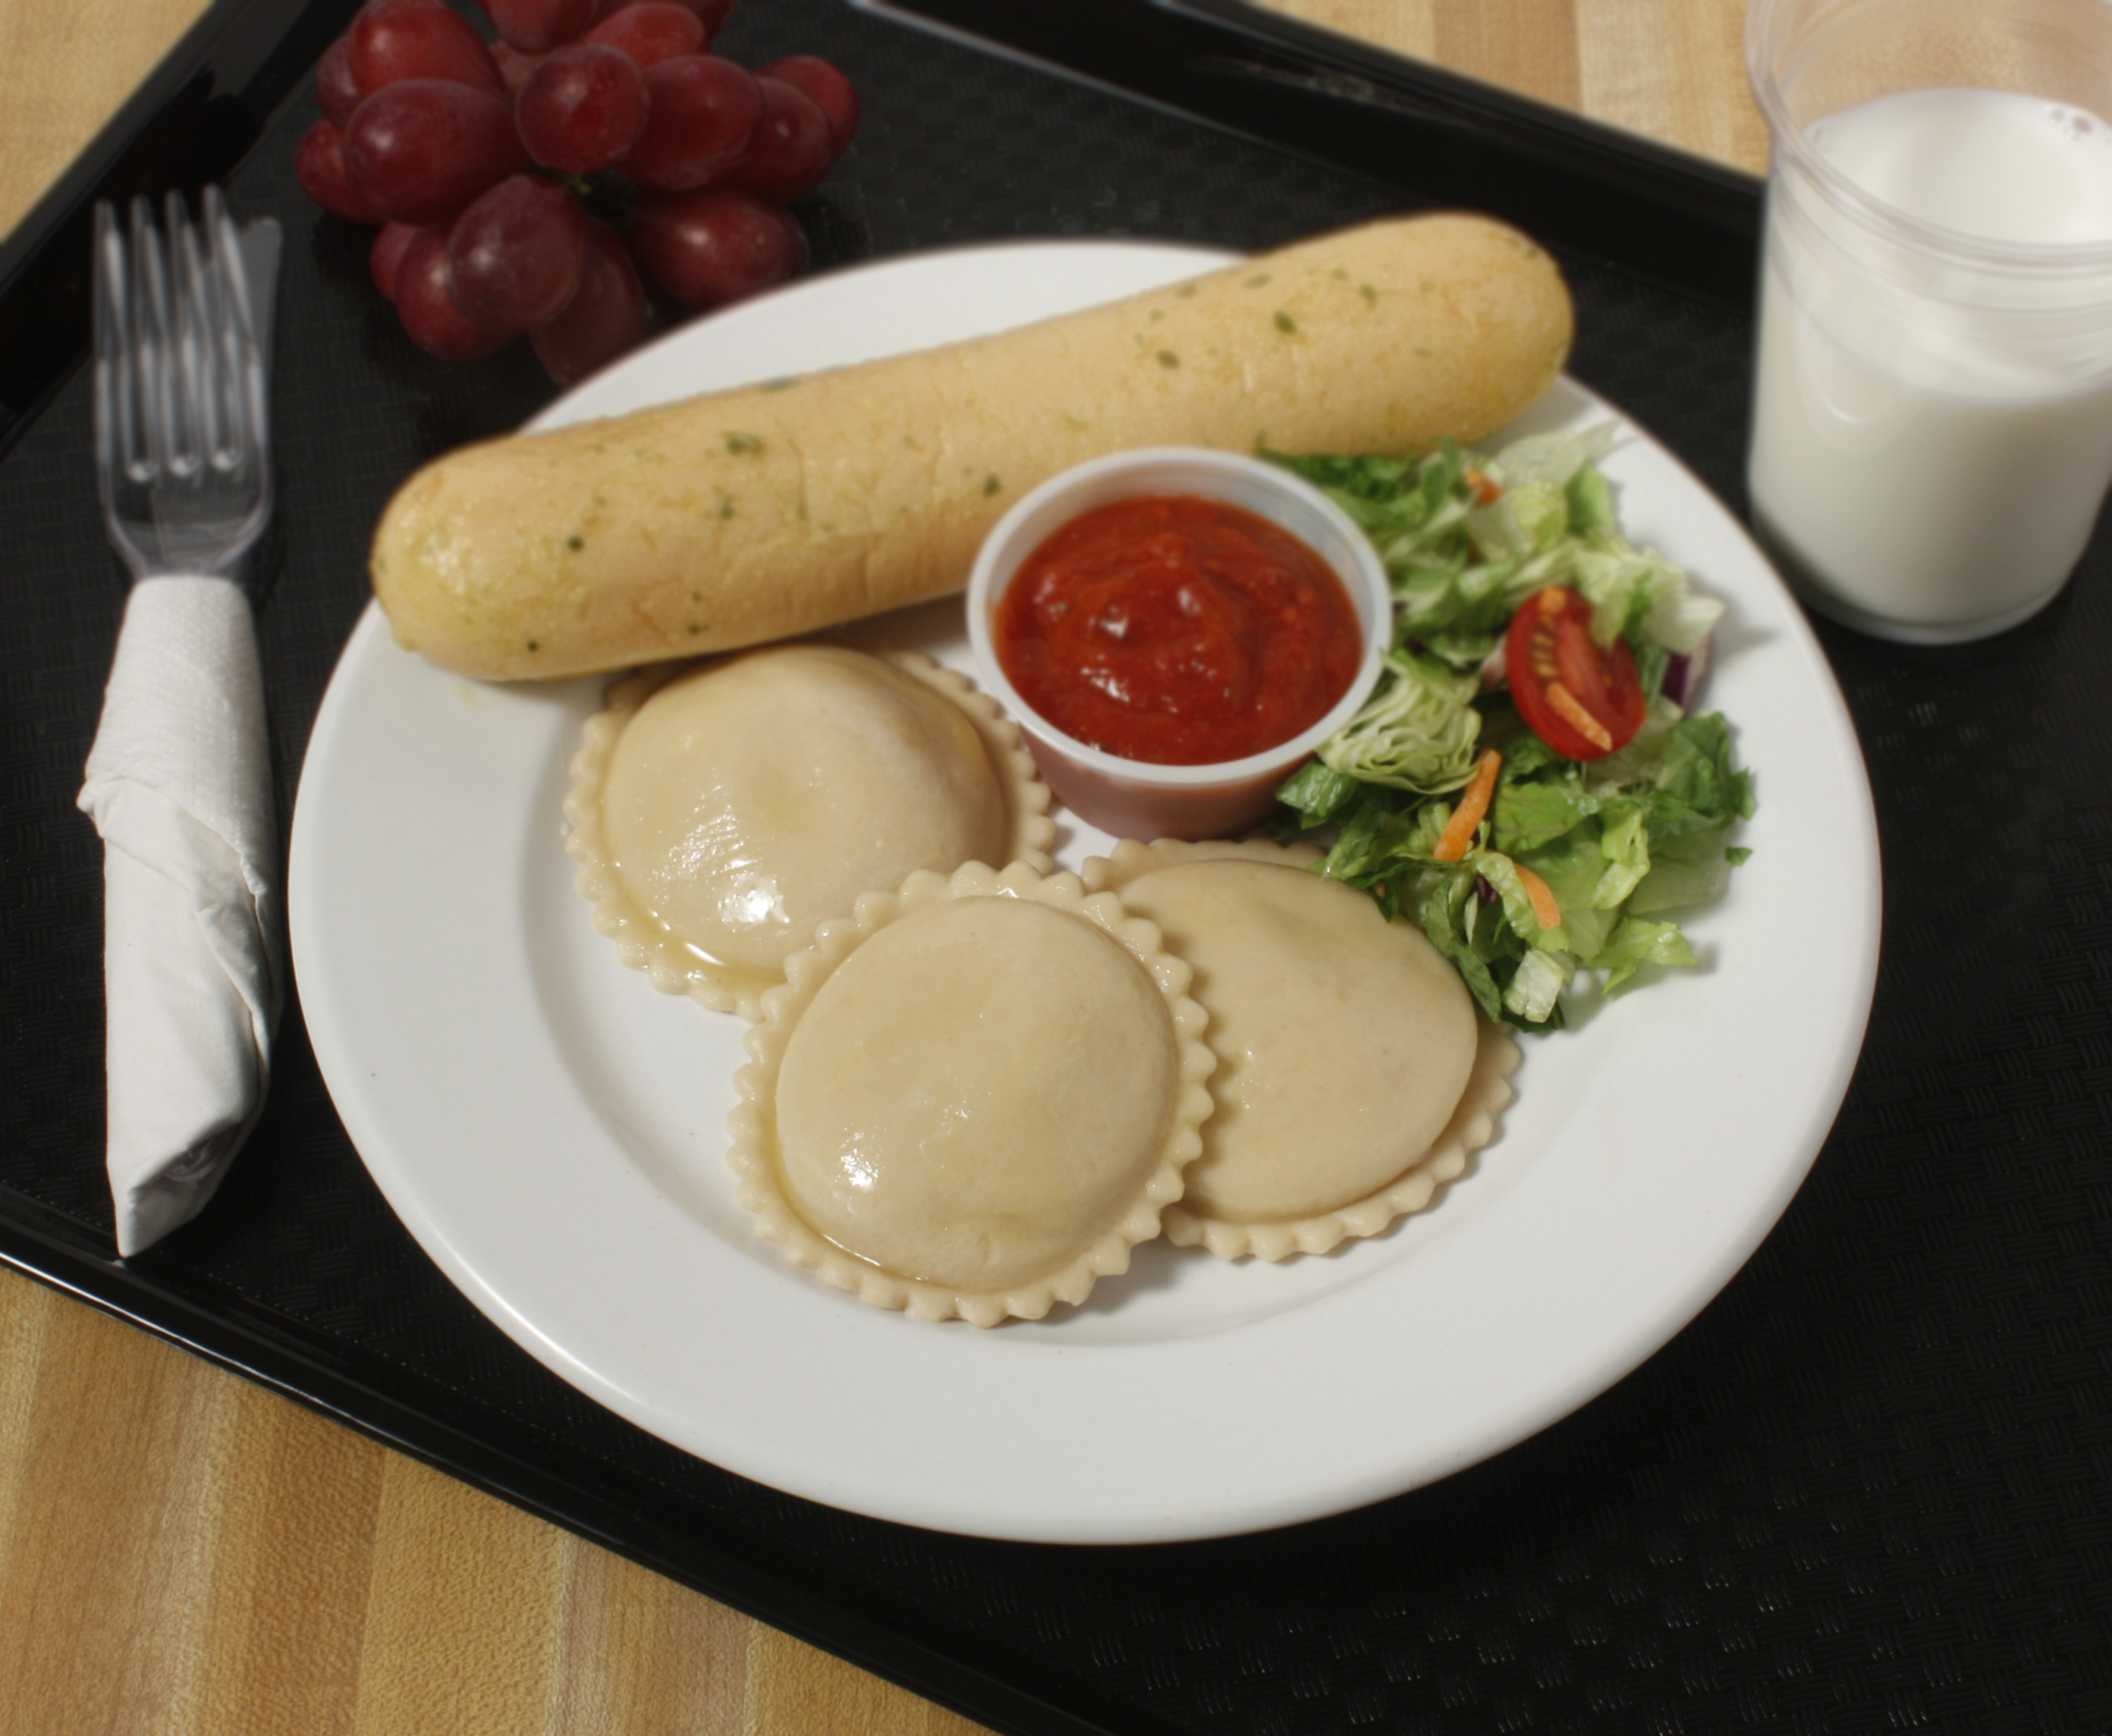 Plate of foodservice Bernardi Italian Ravioli with Salad and a Breadstick in a school setting